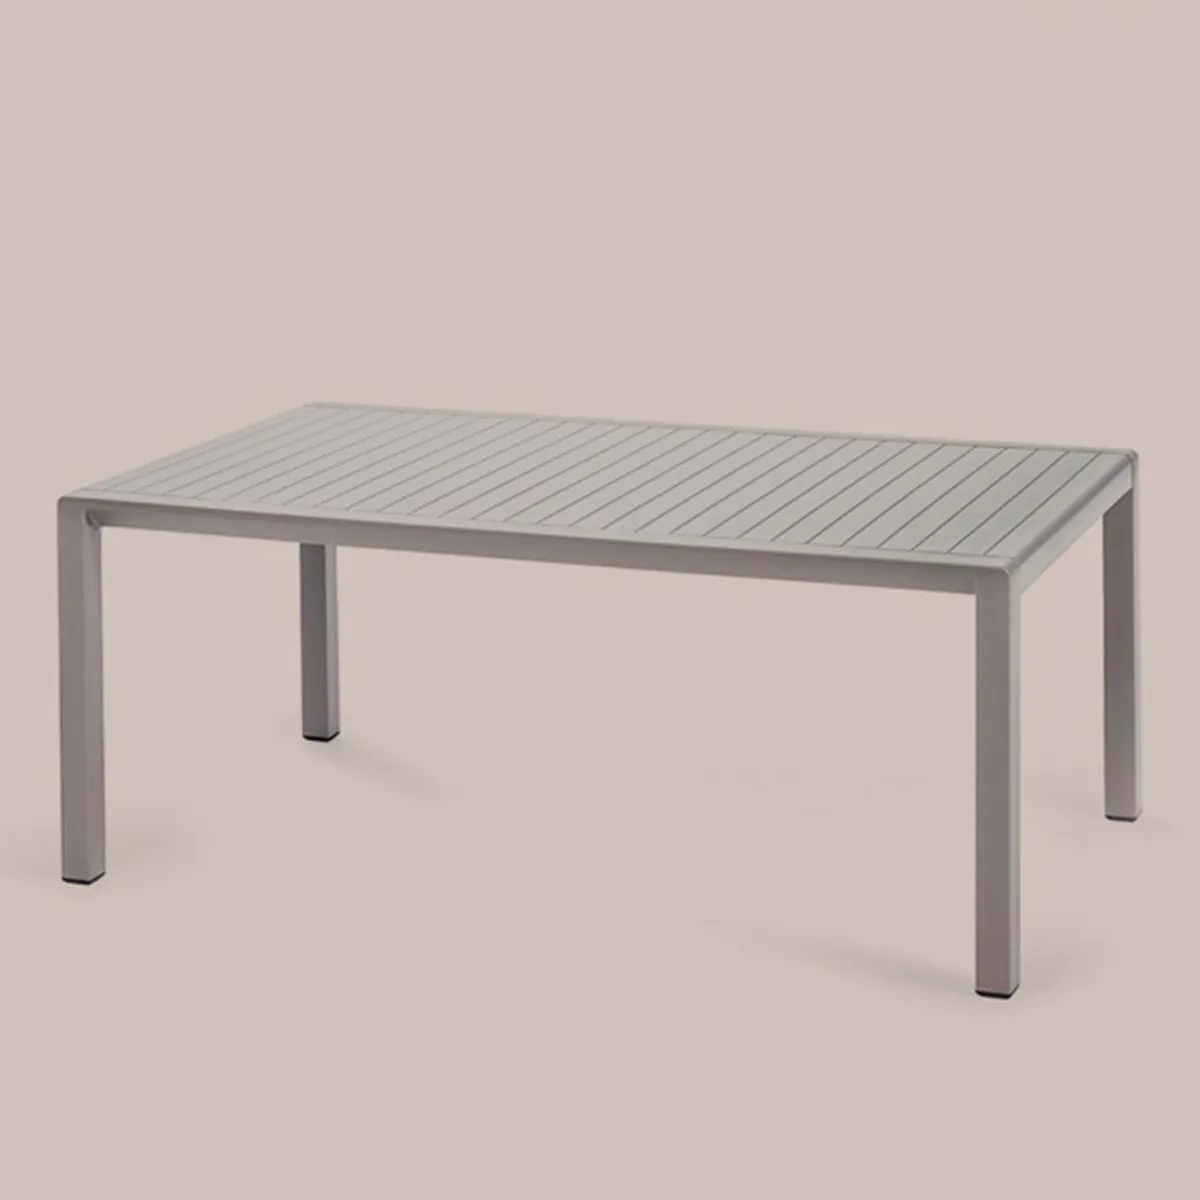 Aria tavolino coffee table Inside Out Contracts3